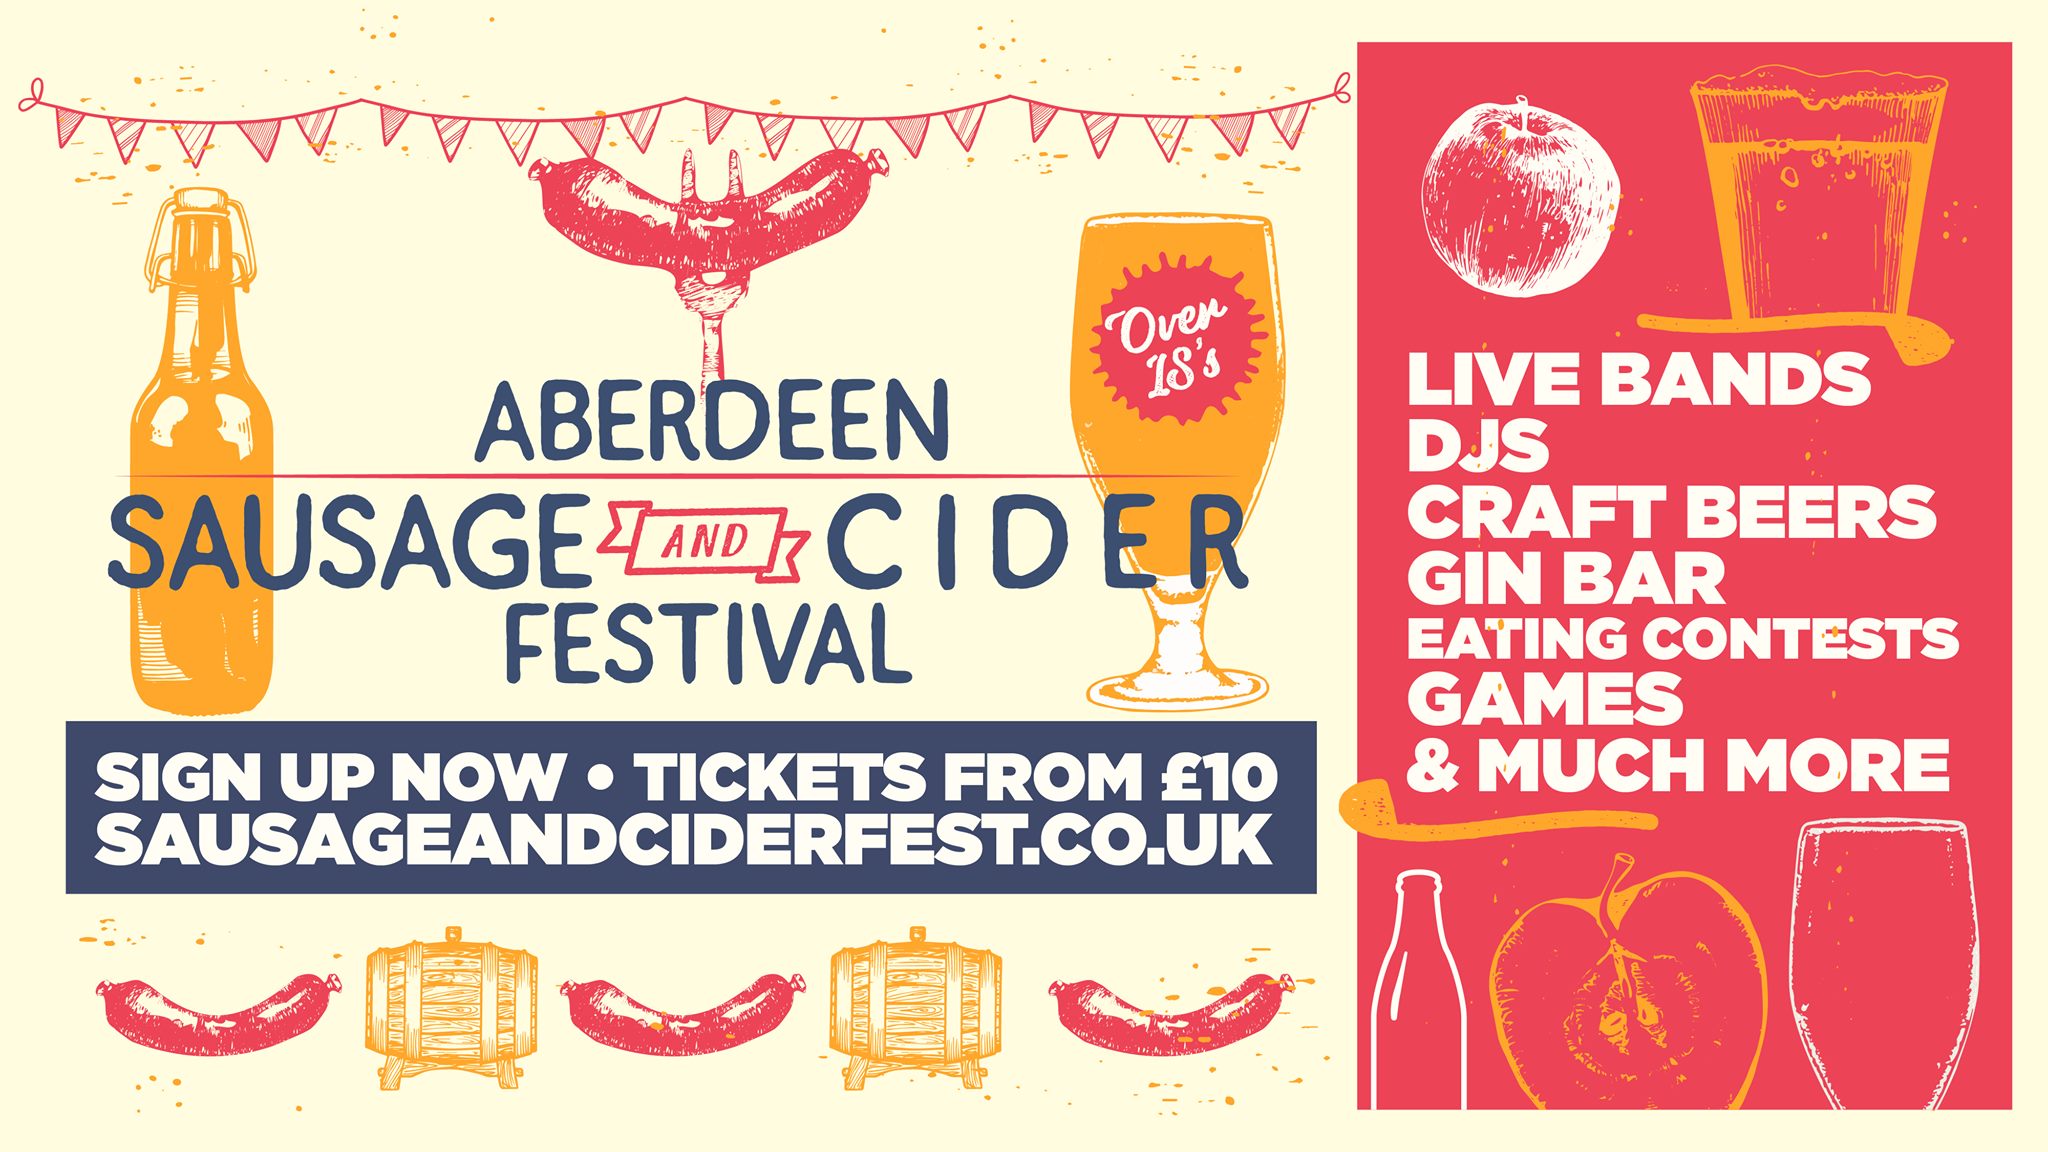 Sausage and cider festival to come to Aberdeen Society